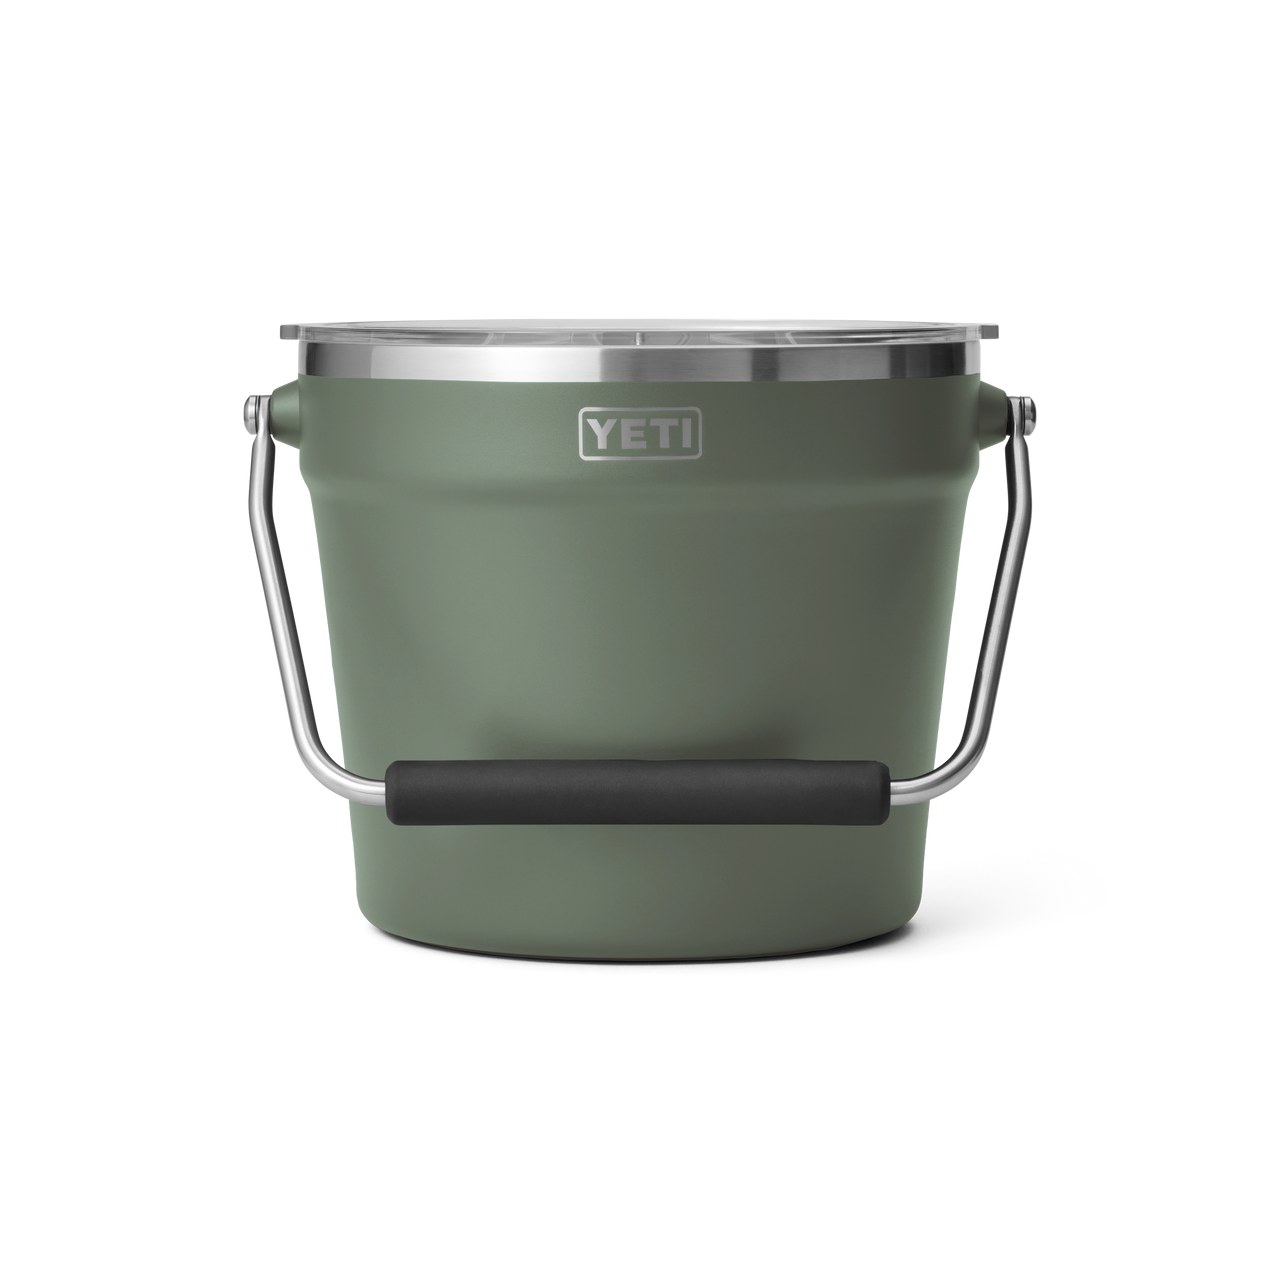 The Yeti Beverage Bucket Is a Must-Have for Outdoor Occasions - InsideHook